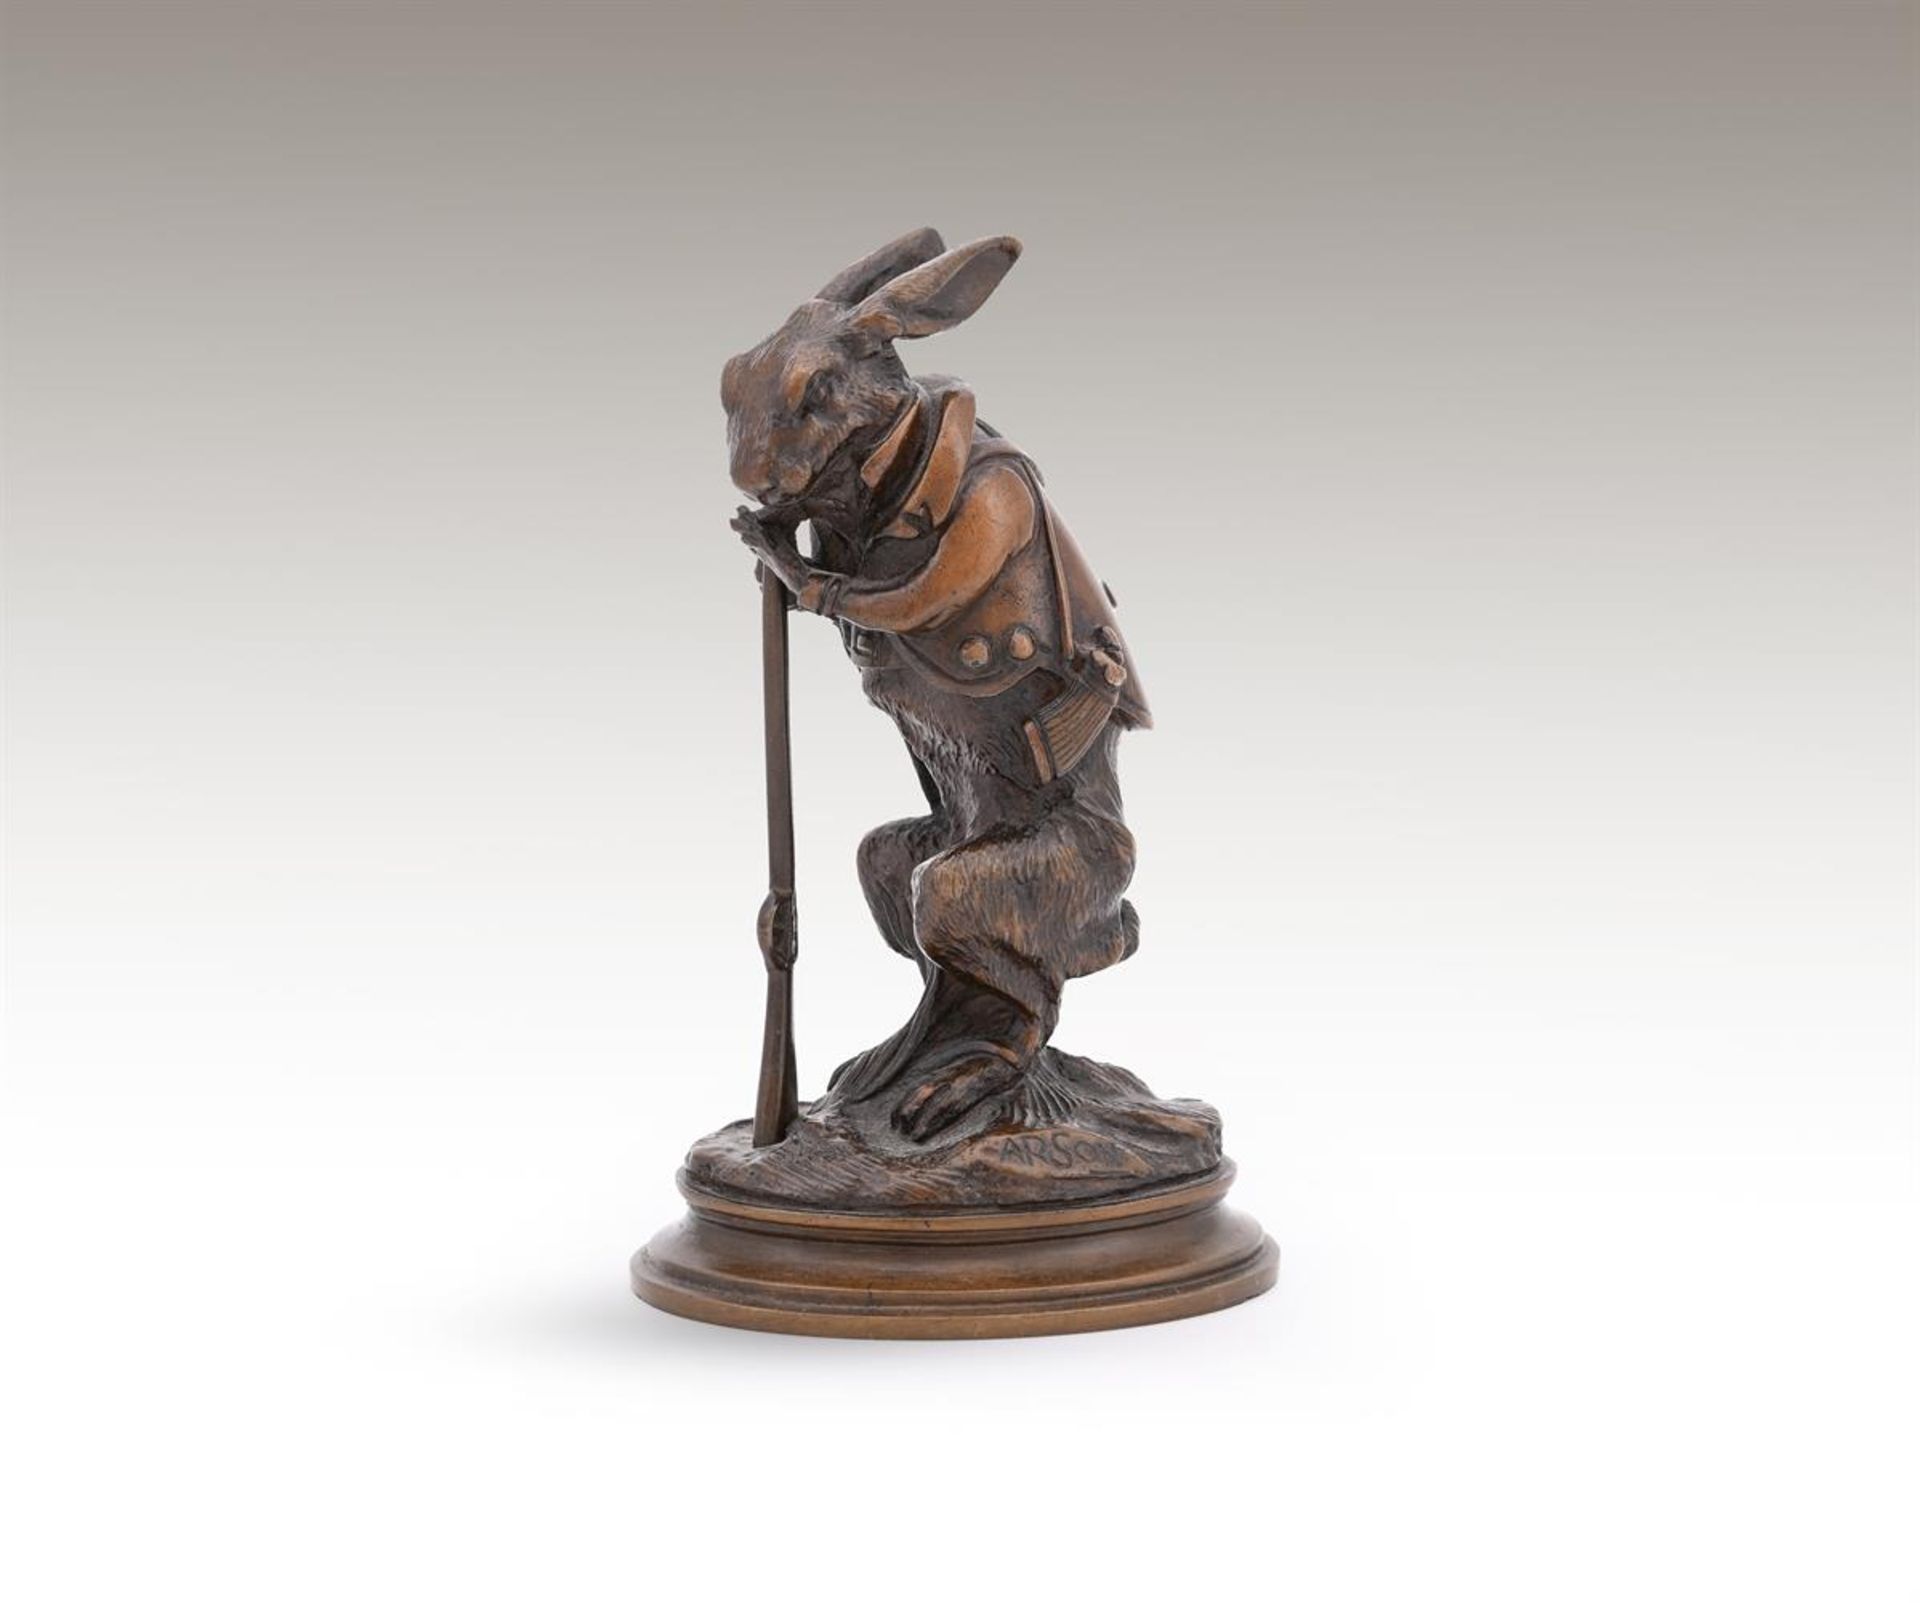 ALPHONSE-ALEXANDRE ARSON (FRENCH, 1822-1895), A BRONZE MODEL OF A HARE DRESSED AS A HUNTER - Image 5 of 5